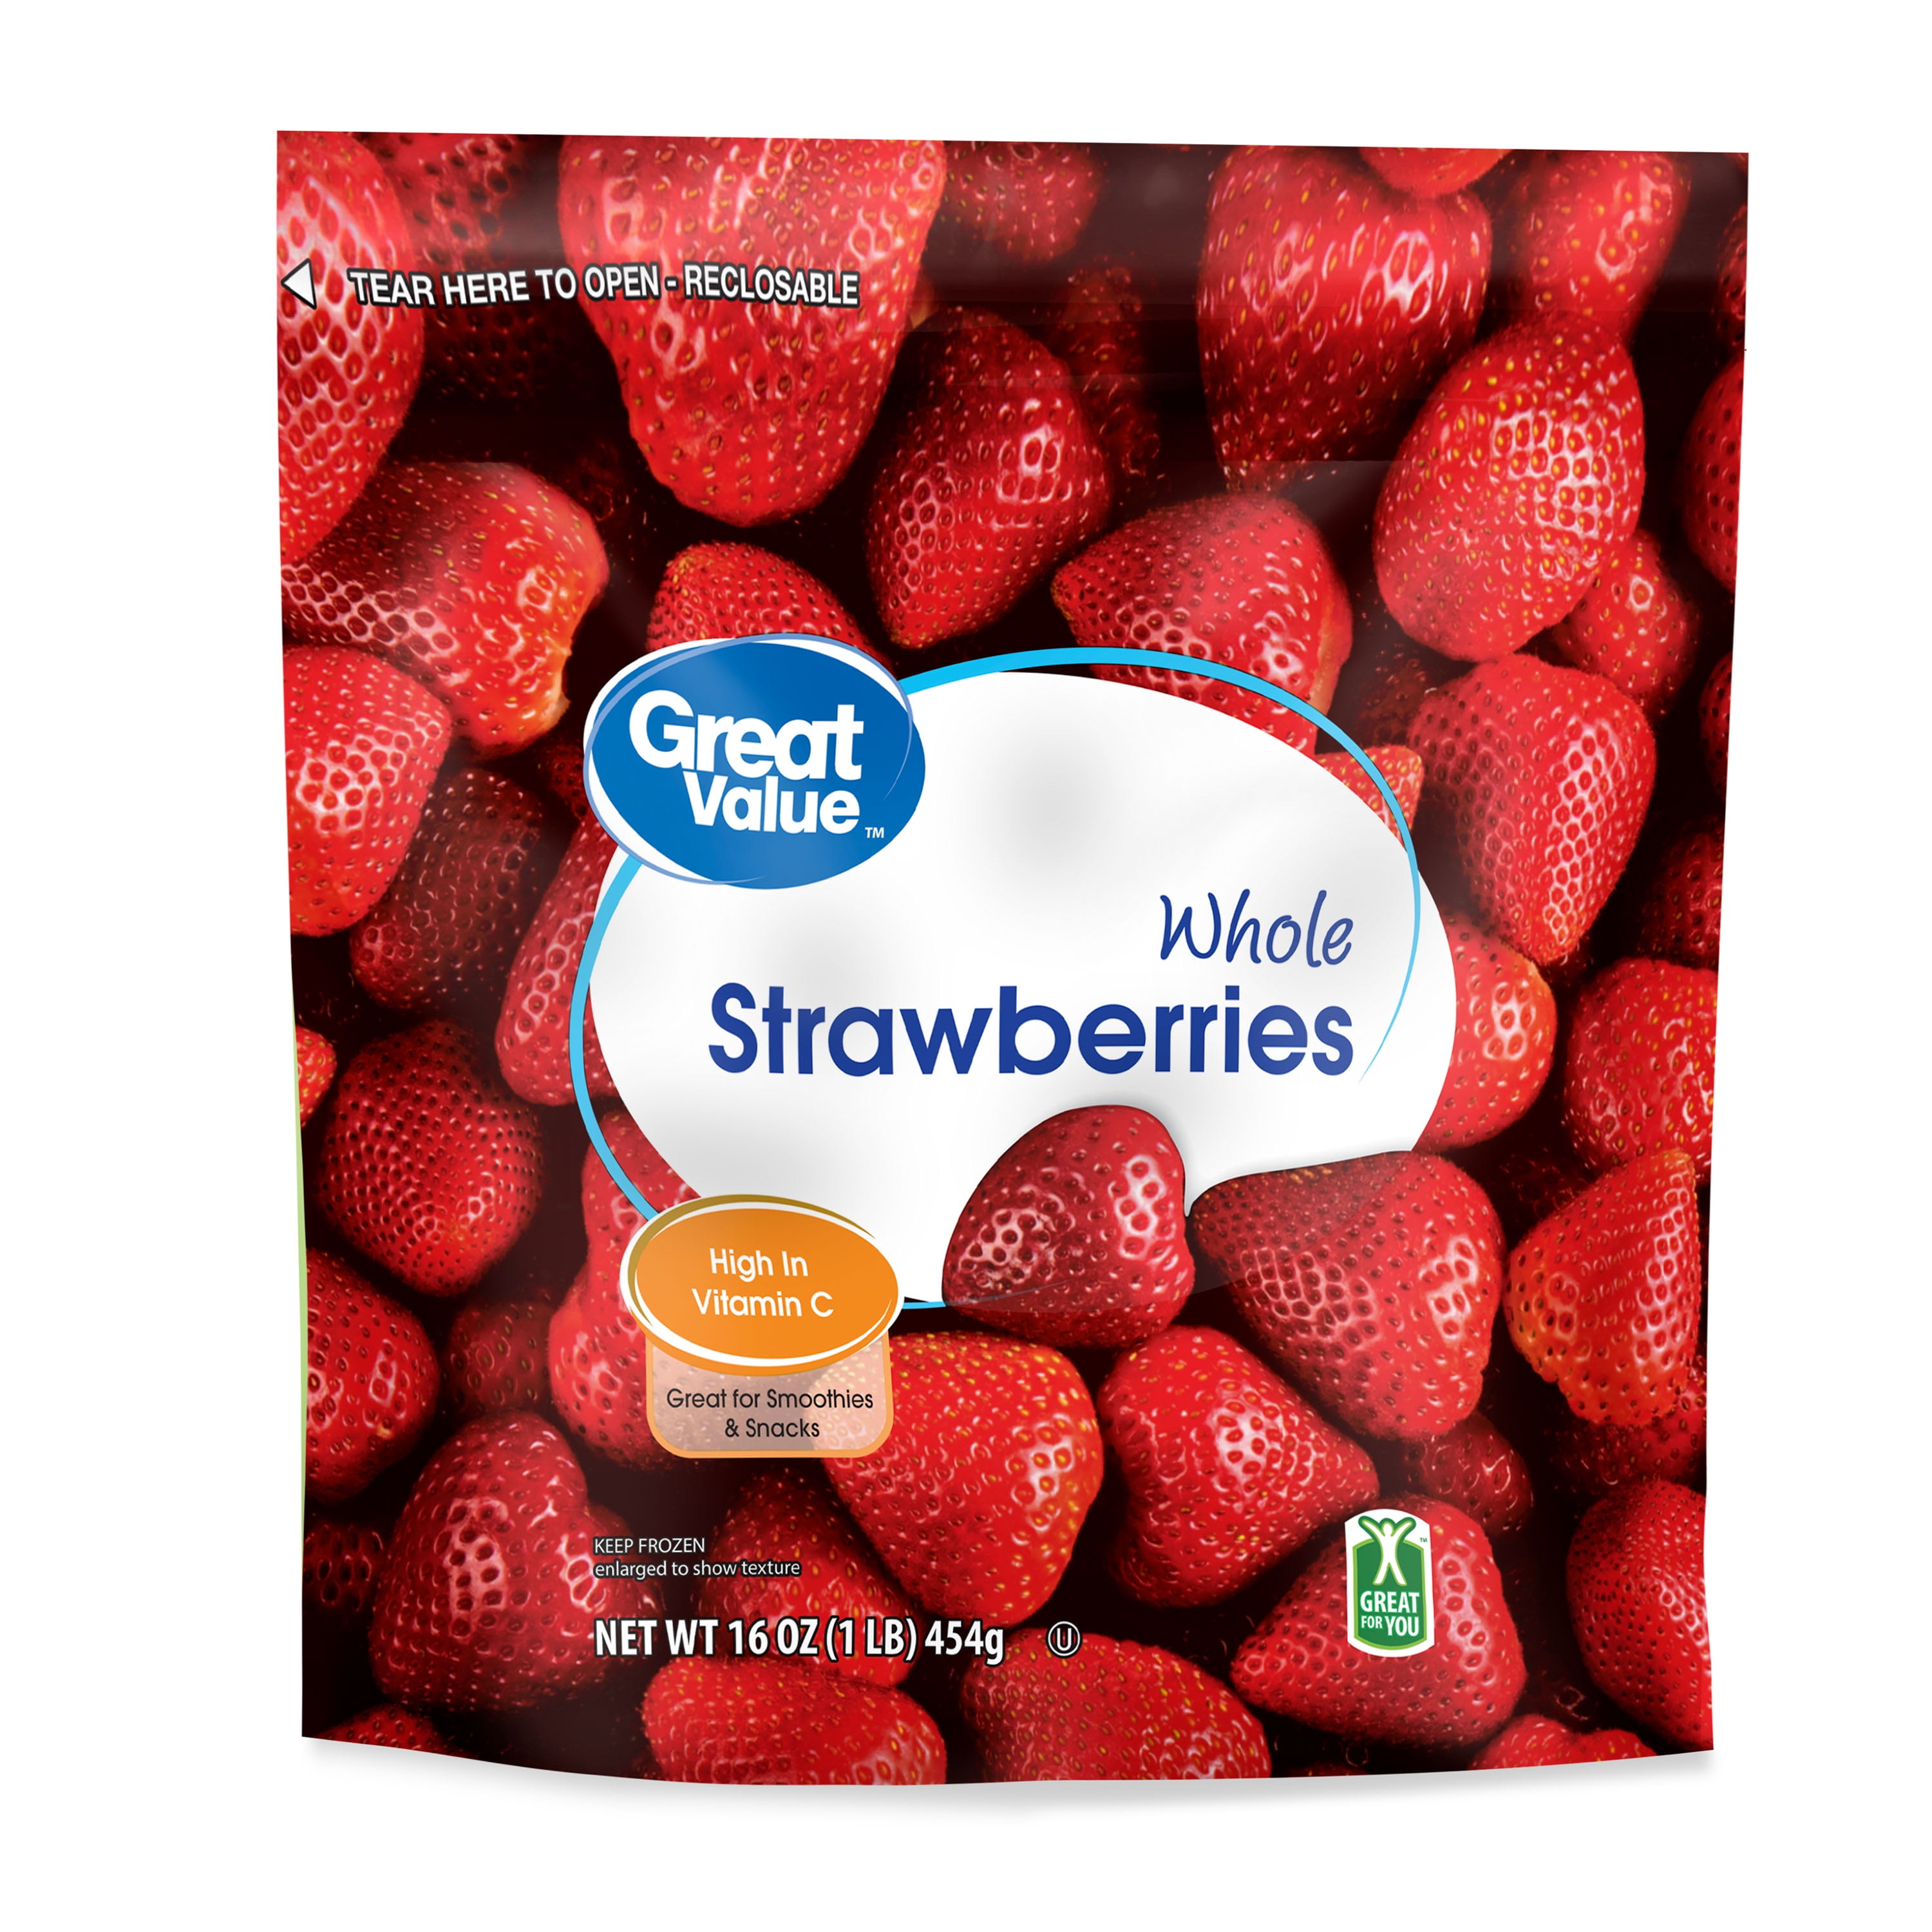 Great Value Whole Strawberries, Frozen, 16 oz